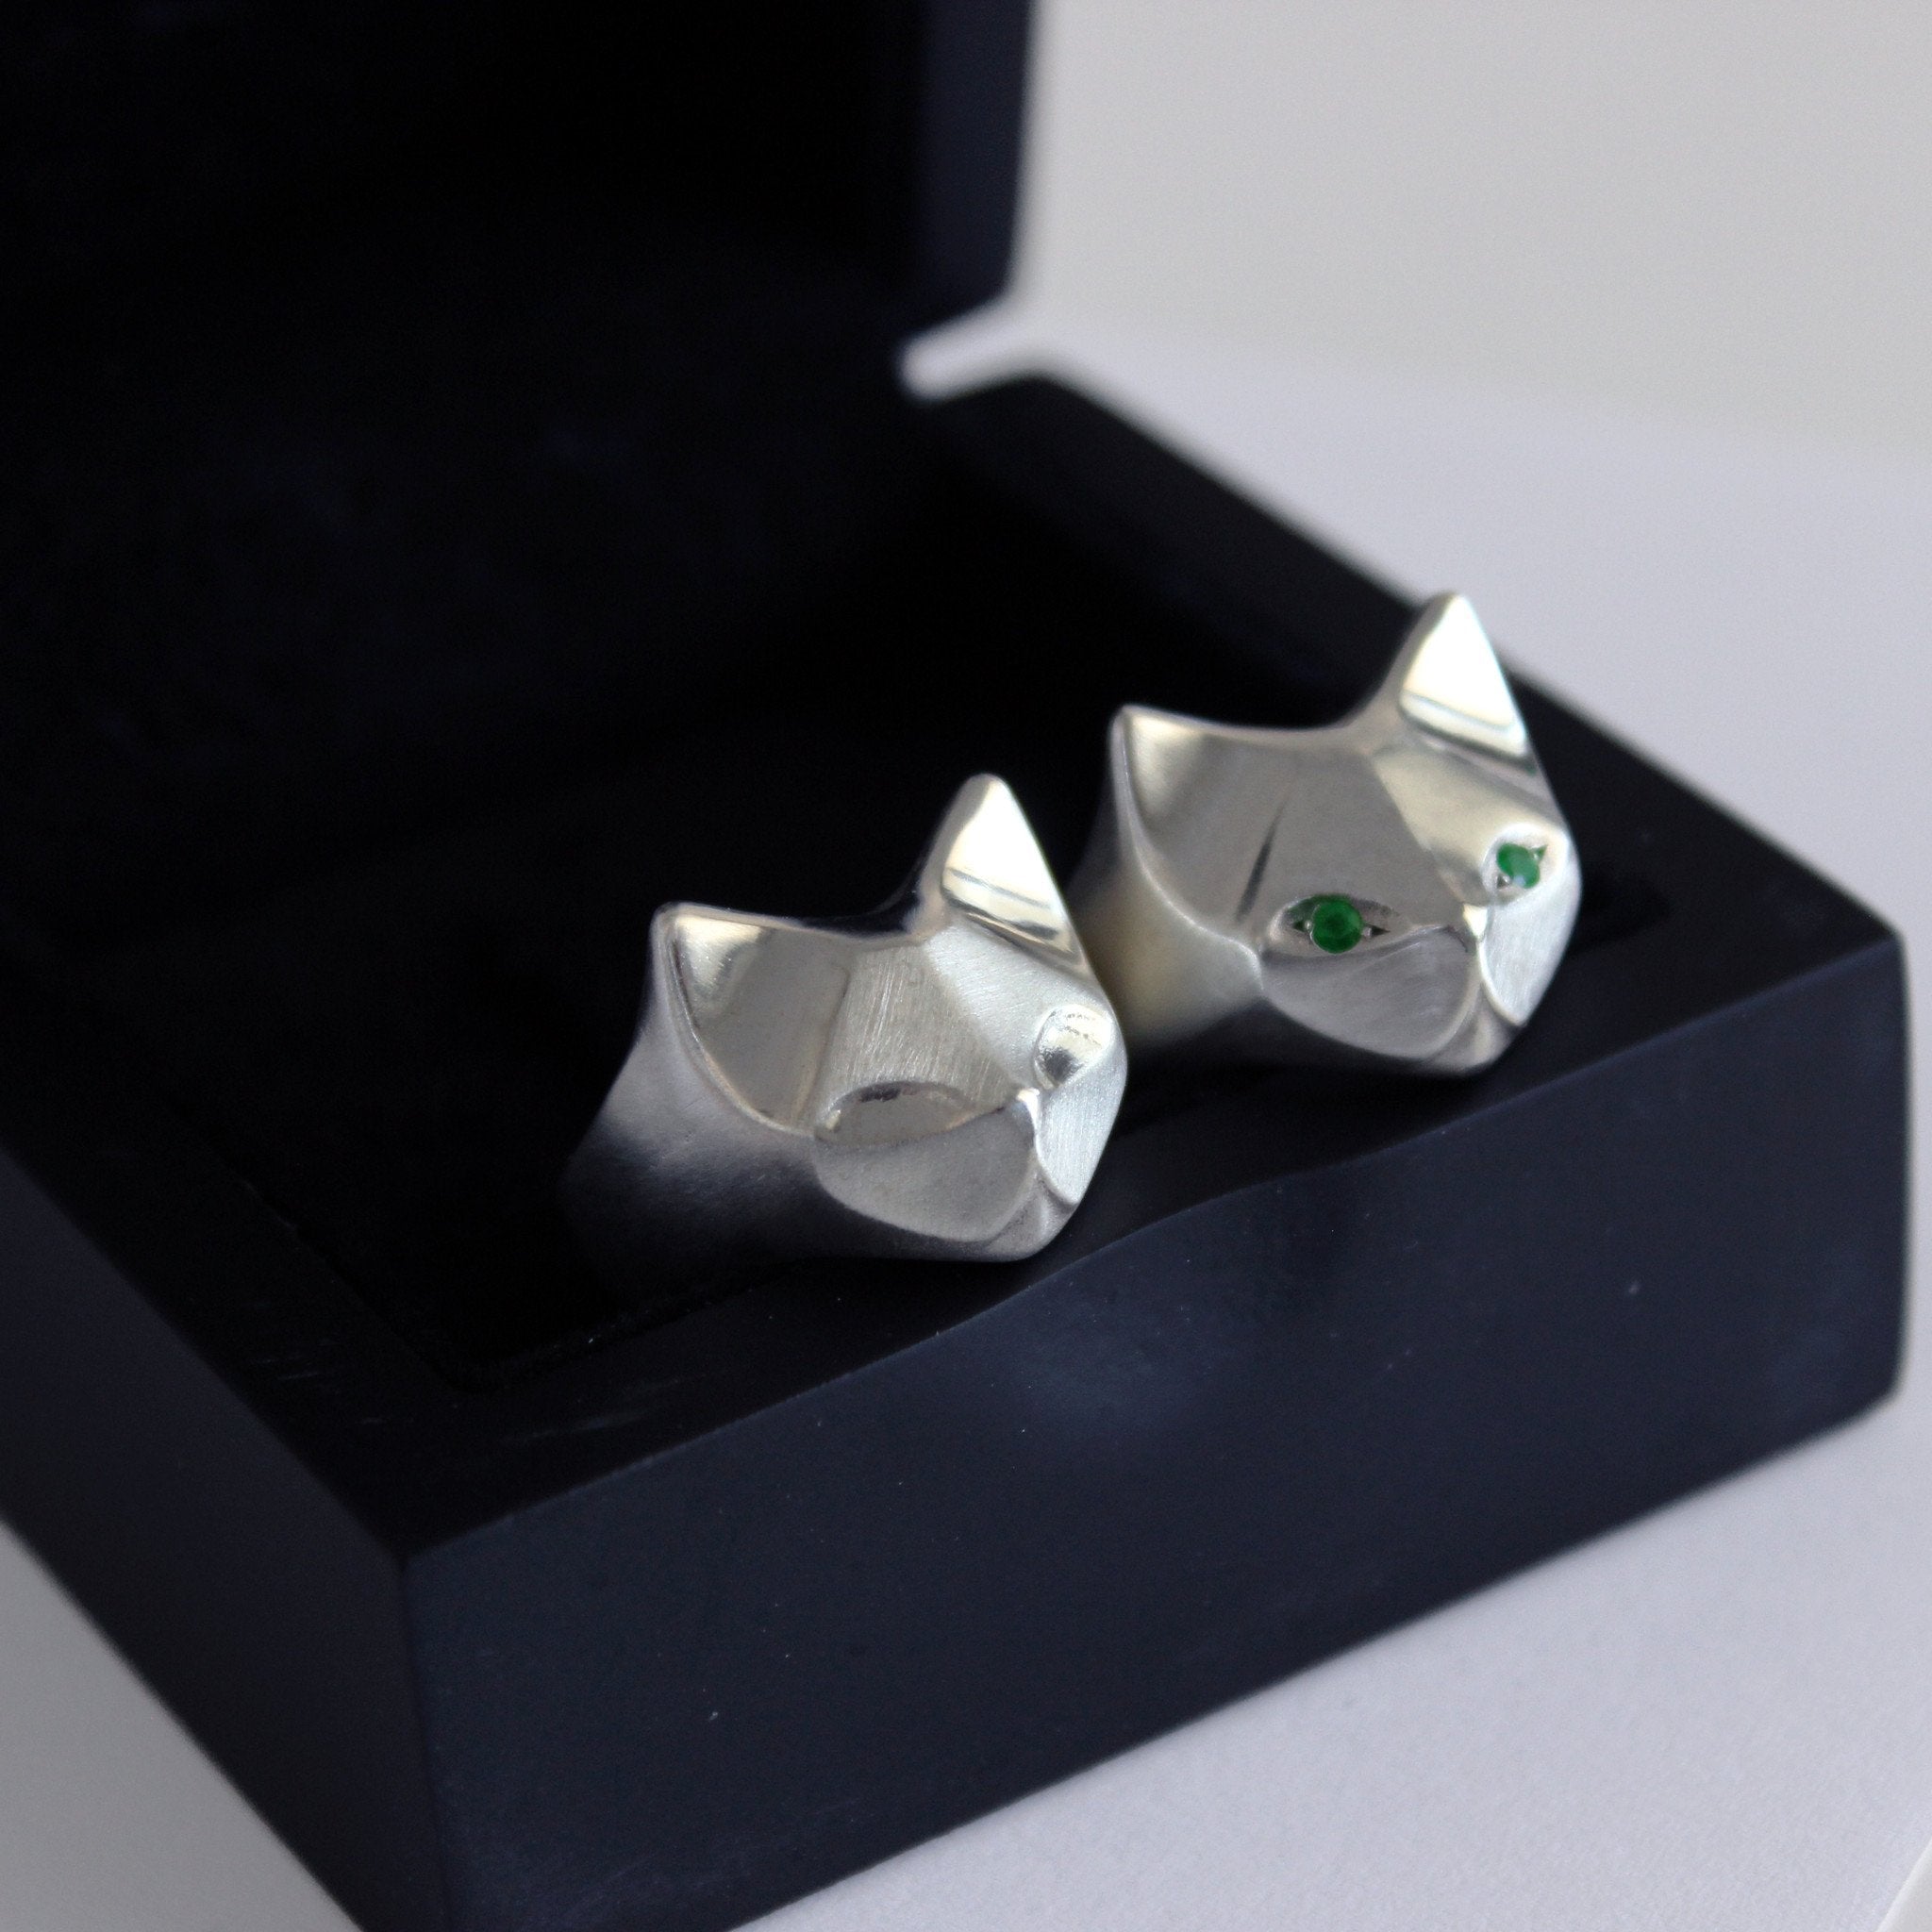 ___ Jewelry Cat Ring With Emerlad Eyes